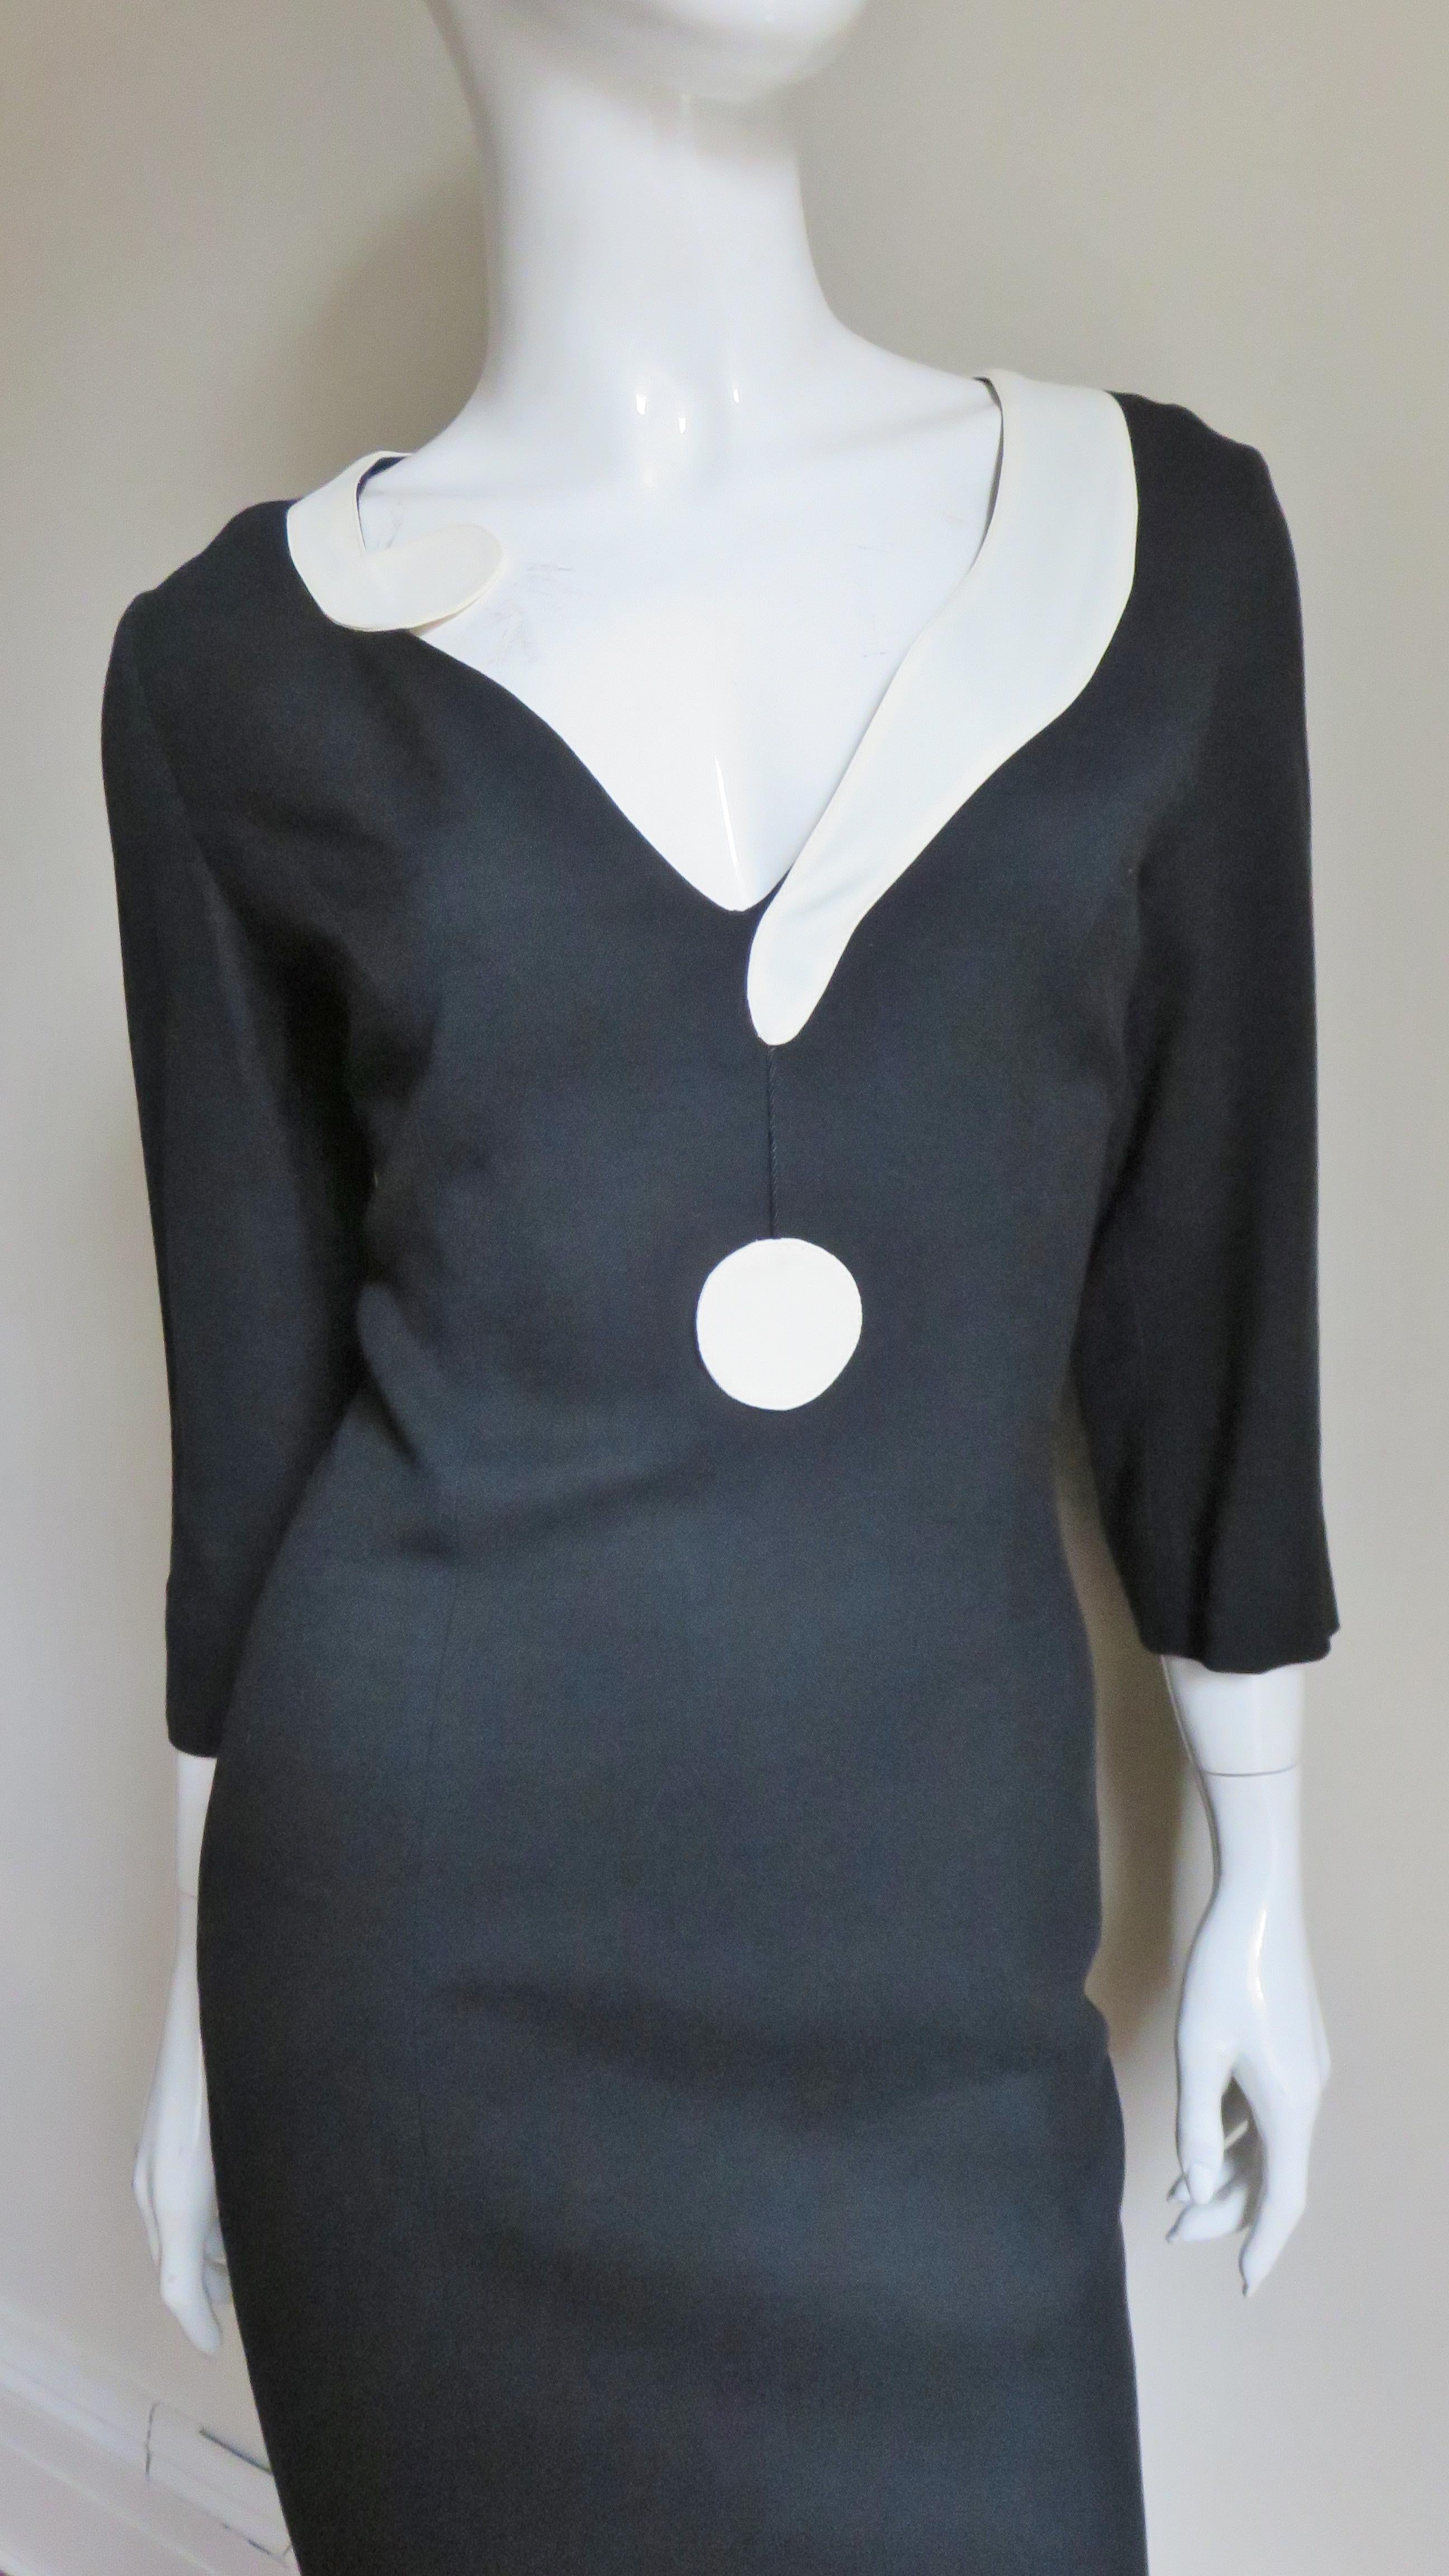 Moschino Couture Dress with Question Mark Collar A/W 1998 In Excellent Condition For Sale In Water Mill, NY